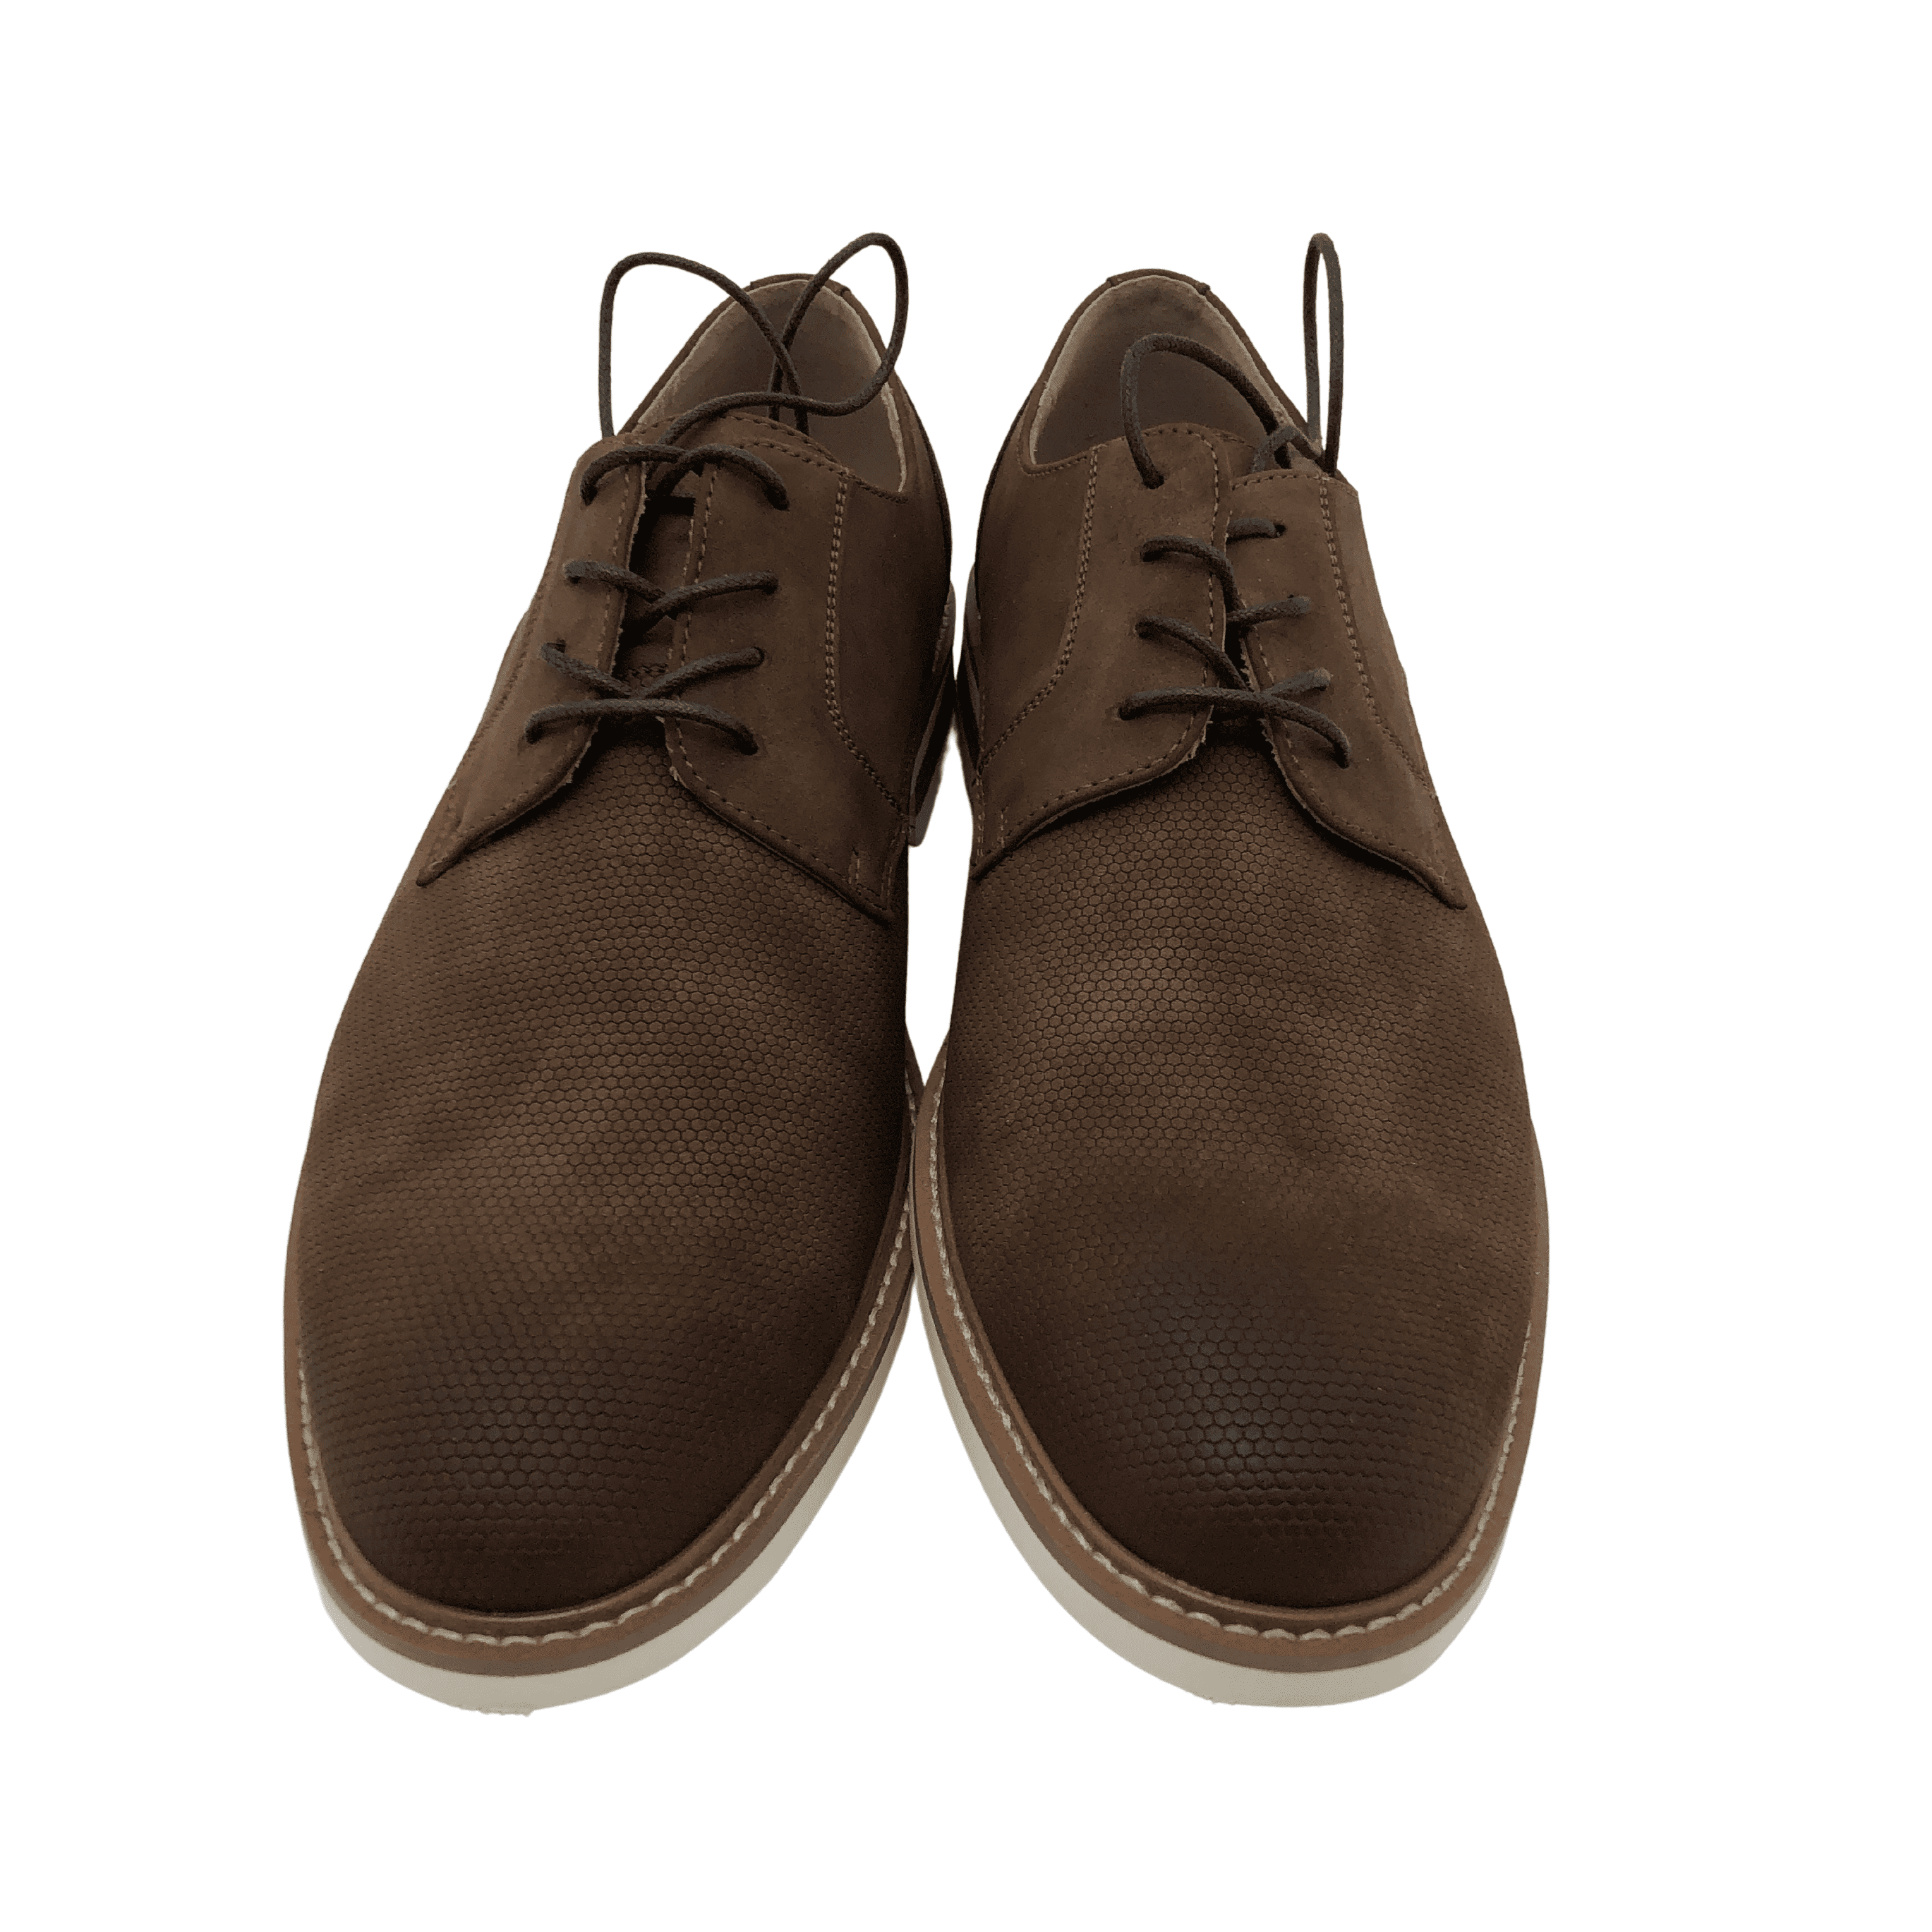 Kenneth Cole Jensen Oxford Shoe / Lace-Up / Brown / Size 12